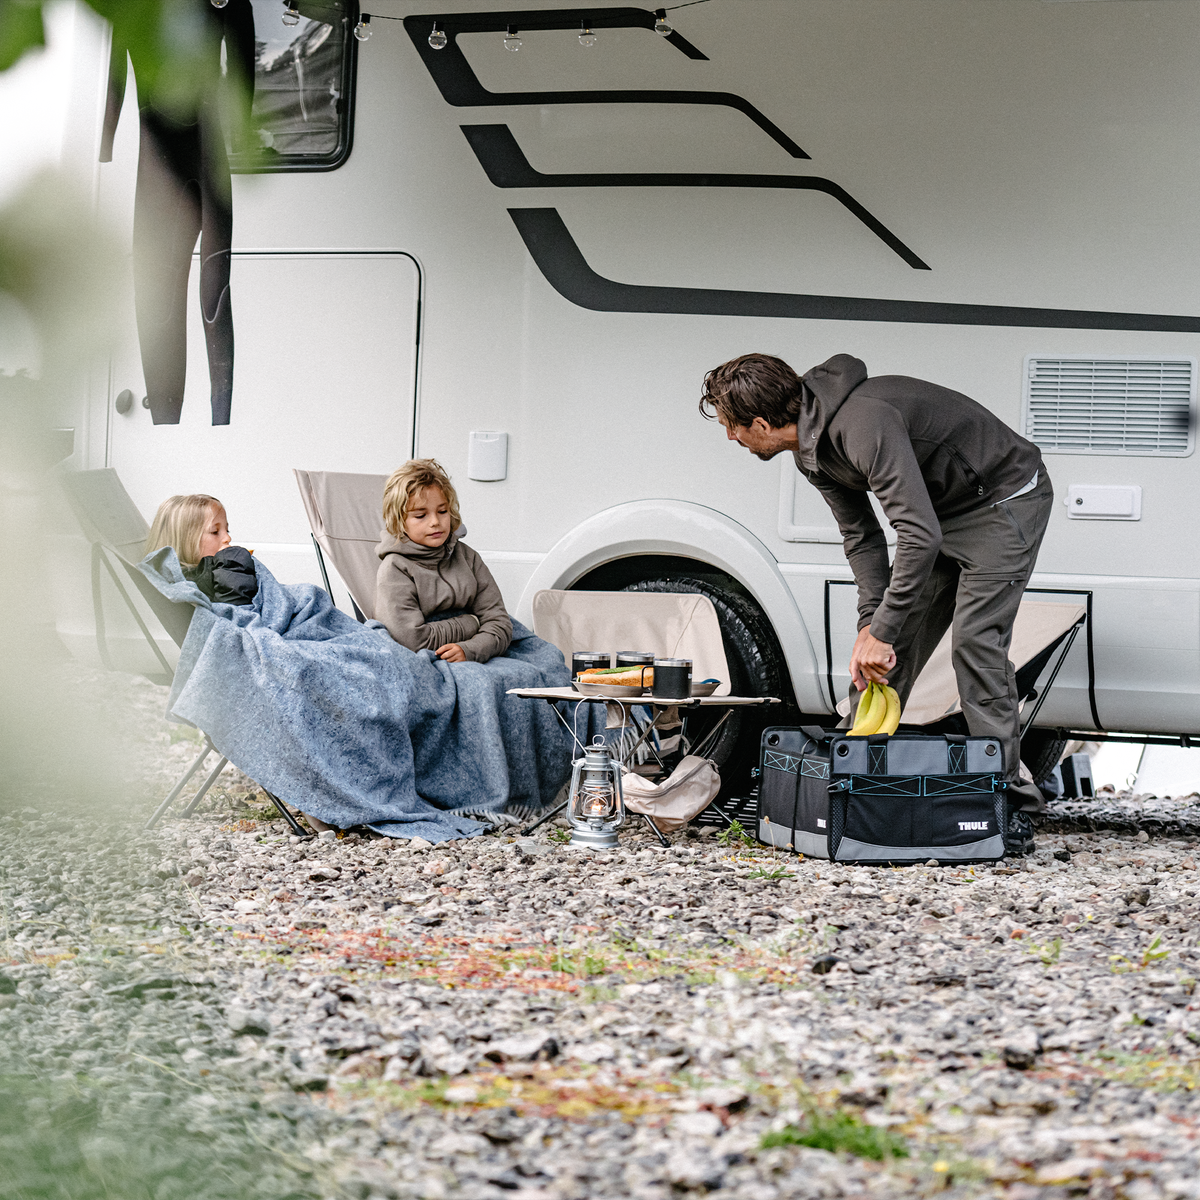 Outside of a motorhome, a person loads things into a Thule Go Box rv organizer.